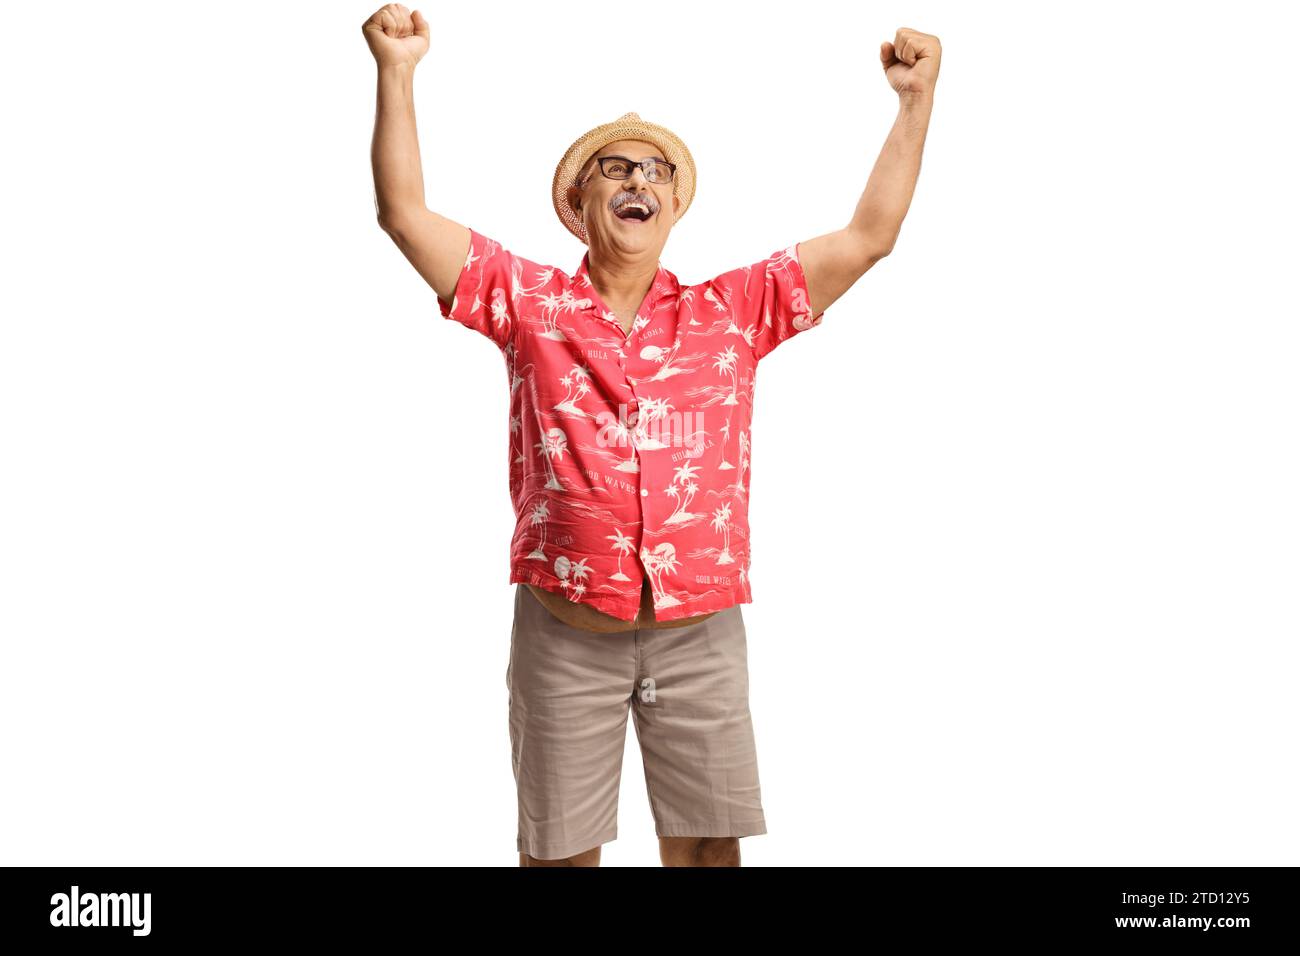 Overjoyed mature man gesturing happiness and looking up isolated on white background Stock Photo